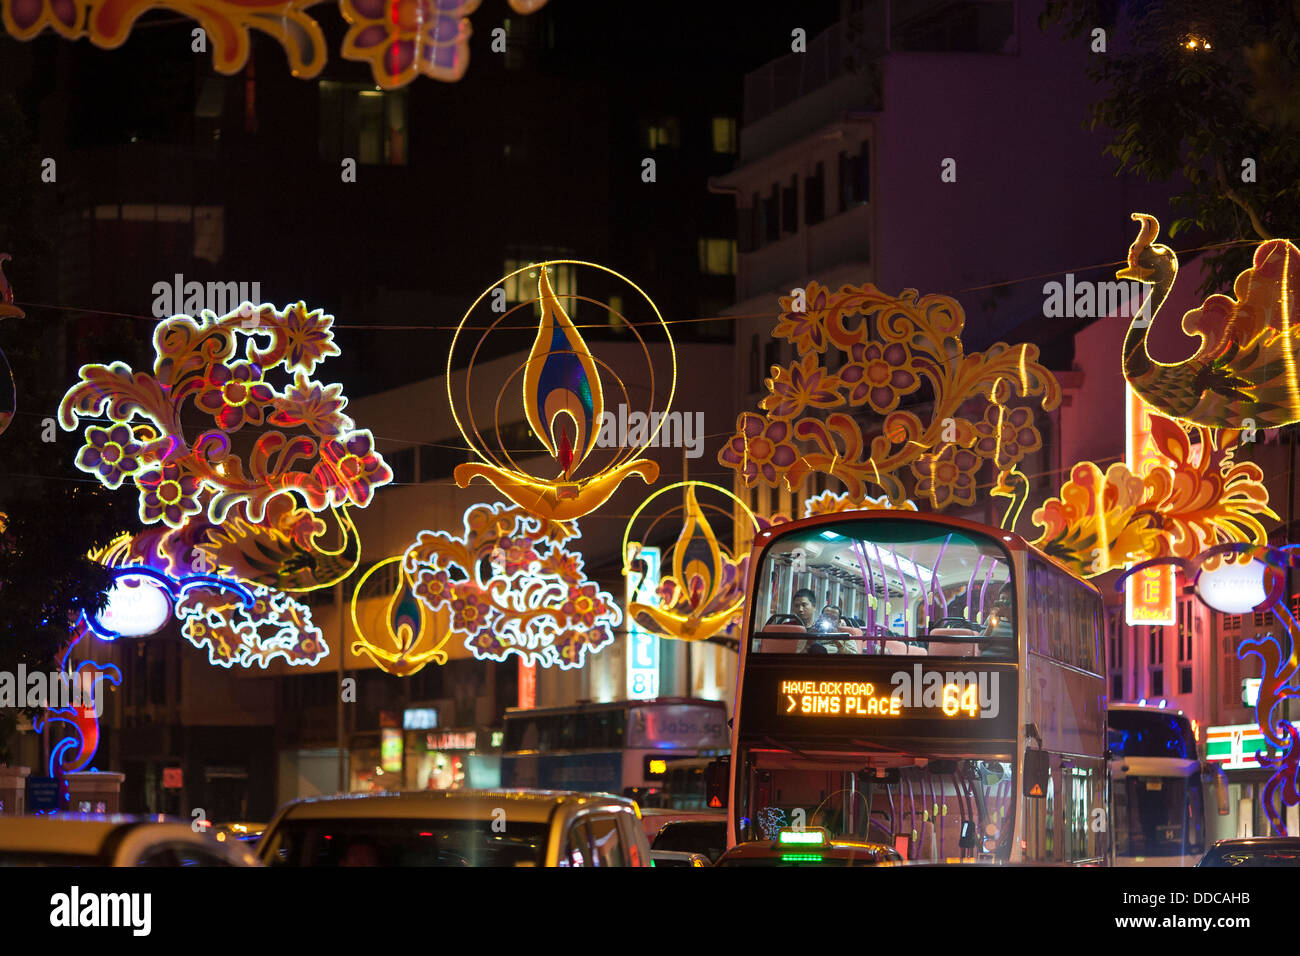 A bus drives through decorated streets celebrate the Hindi festival of Diwali or Deepavali the Asian city state of Singapore Stock Photo